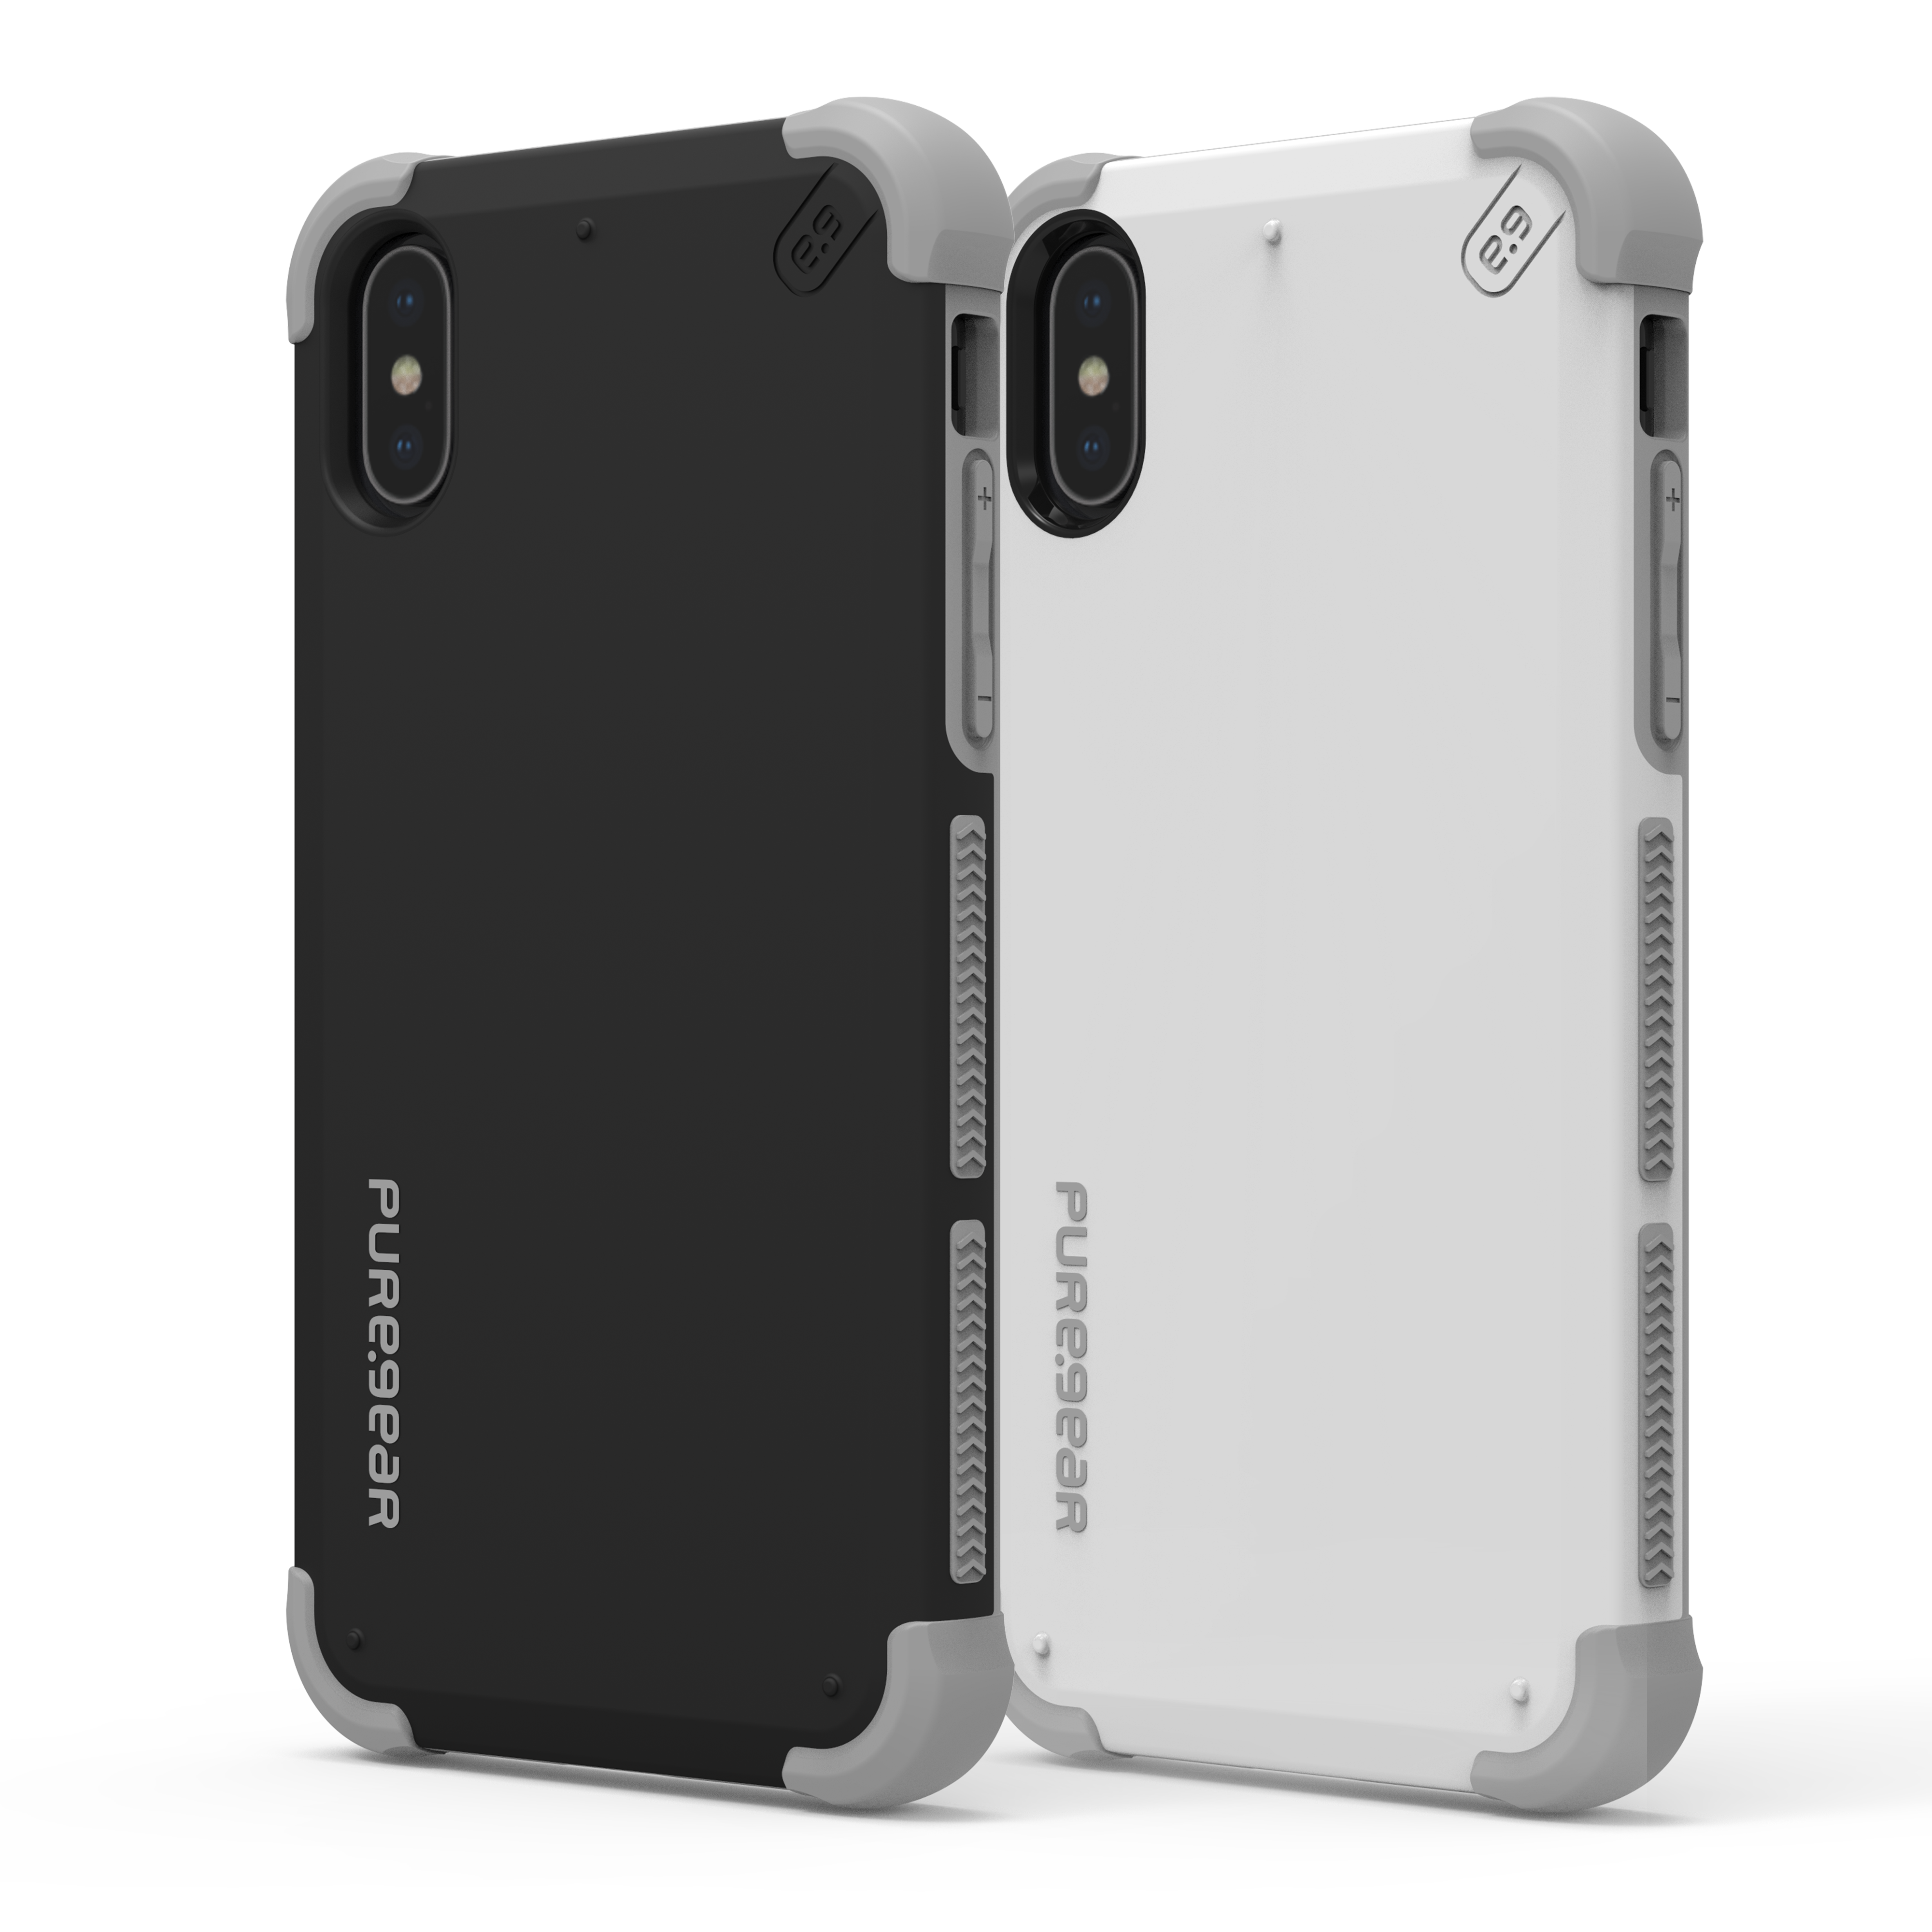 Image of DualTek Case for iPhone X/XS